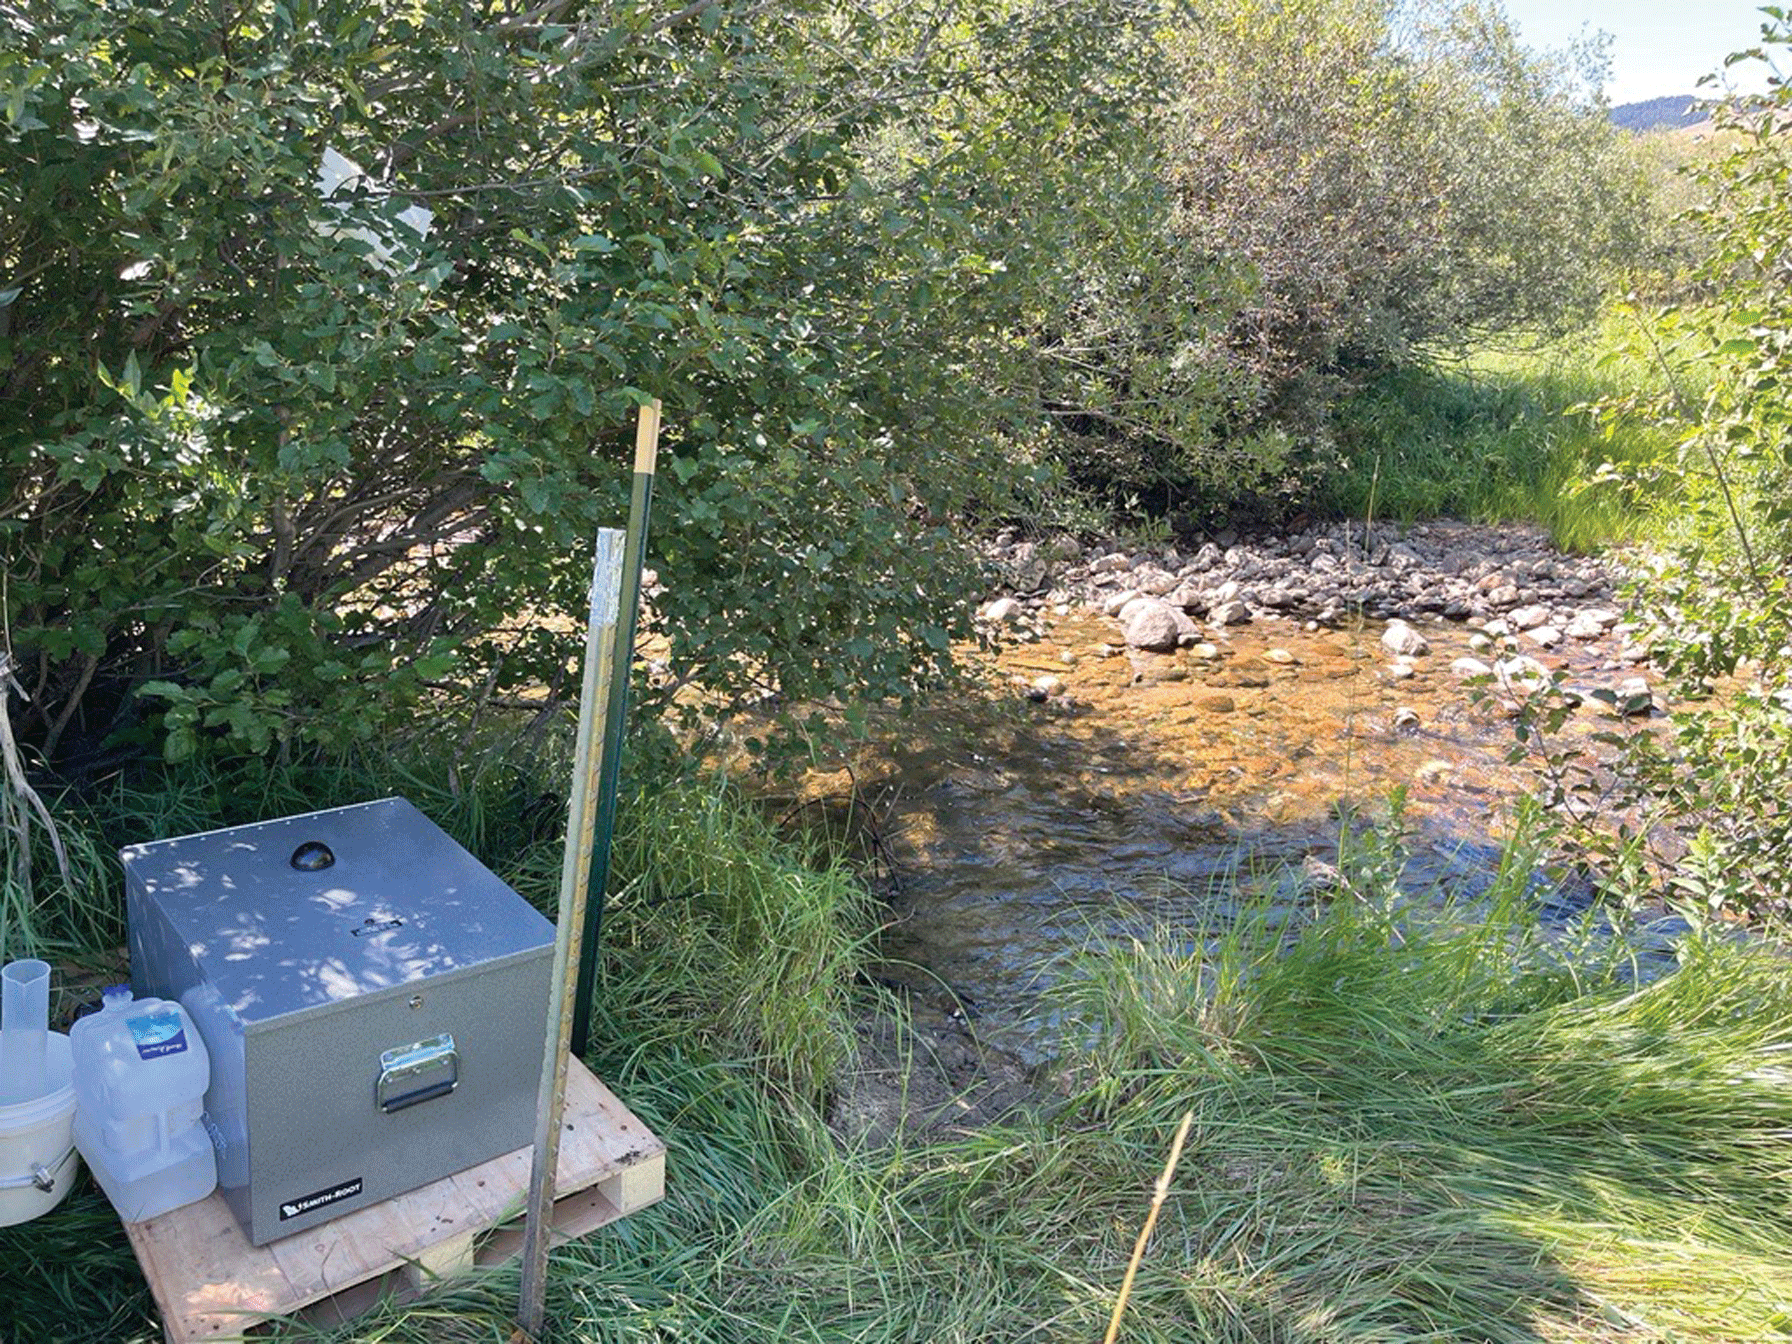 This autonomous eDNA sampler captures, filters, and preserves samples at 3-hour intervals
                     as programmed by the user.